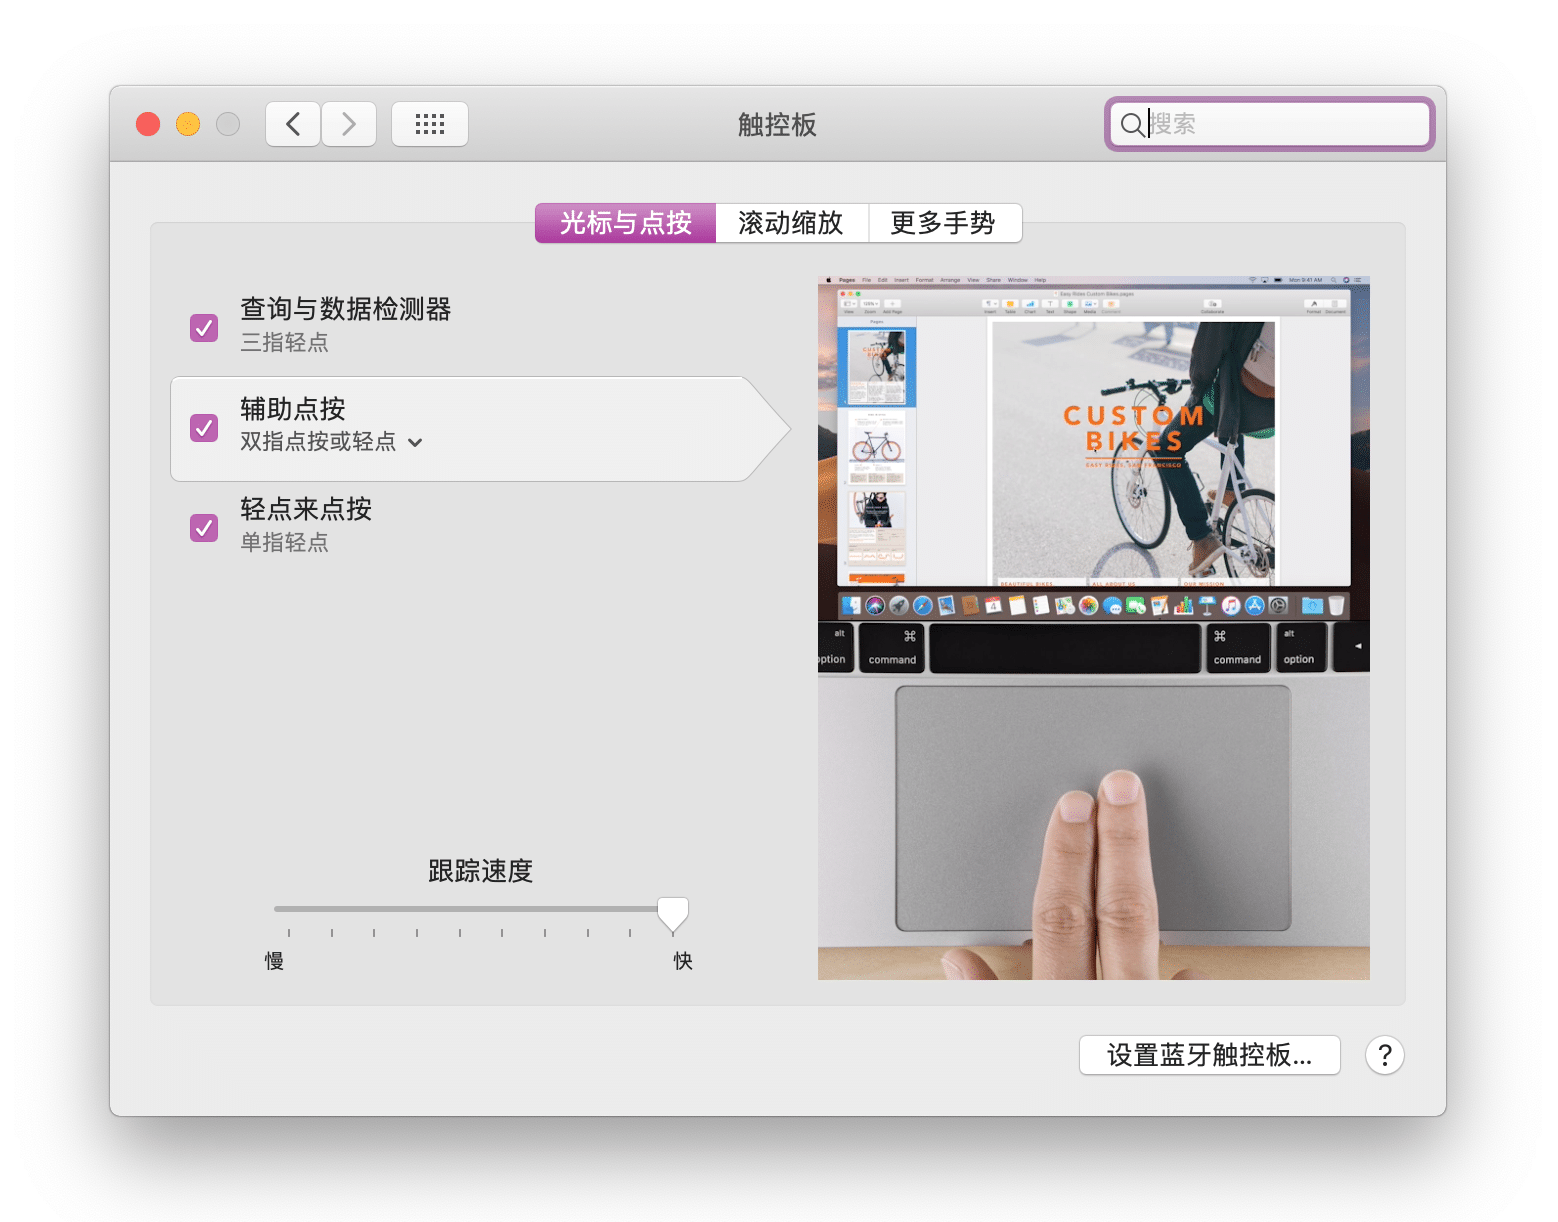 Clipboard - 2019-05-11 01.09.44.png